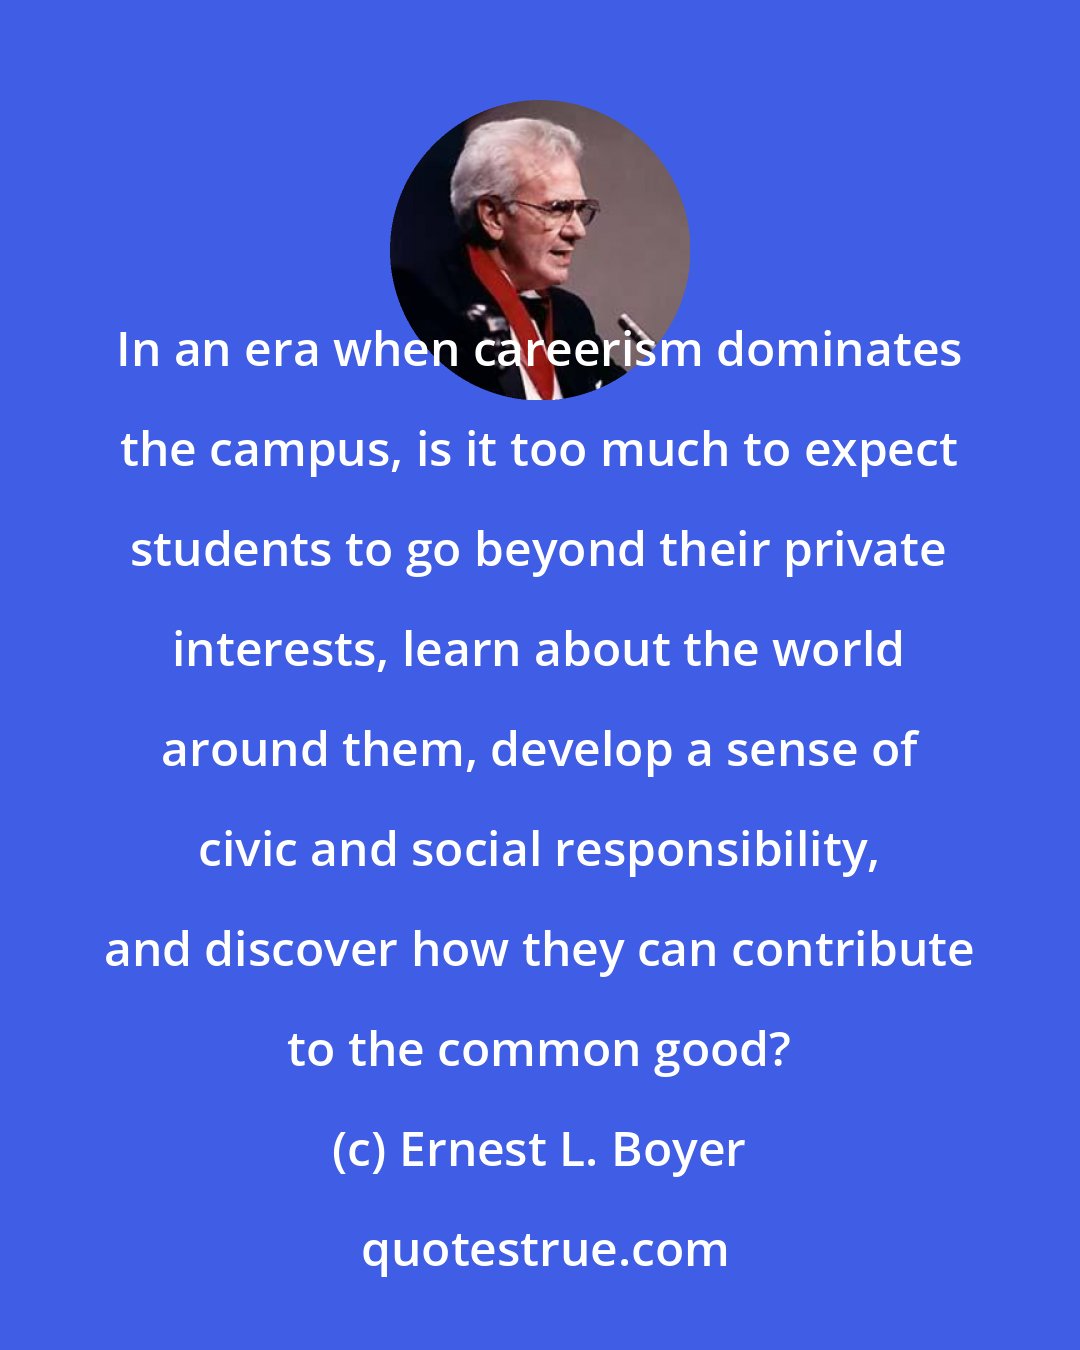 Ernest L. Boyer: In an era when careerism dominates the campus, is it too much to expect students to go beyond their private interests, learn about the world around them, develop a sense of civic and social responsibility, and discover how they can contribute to the common good?